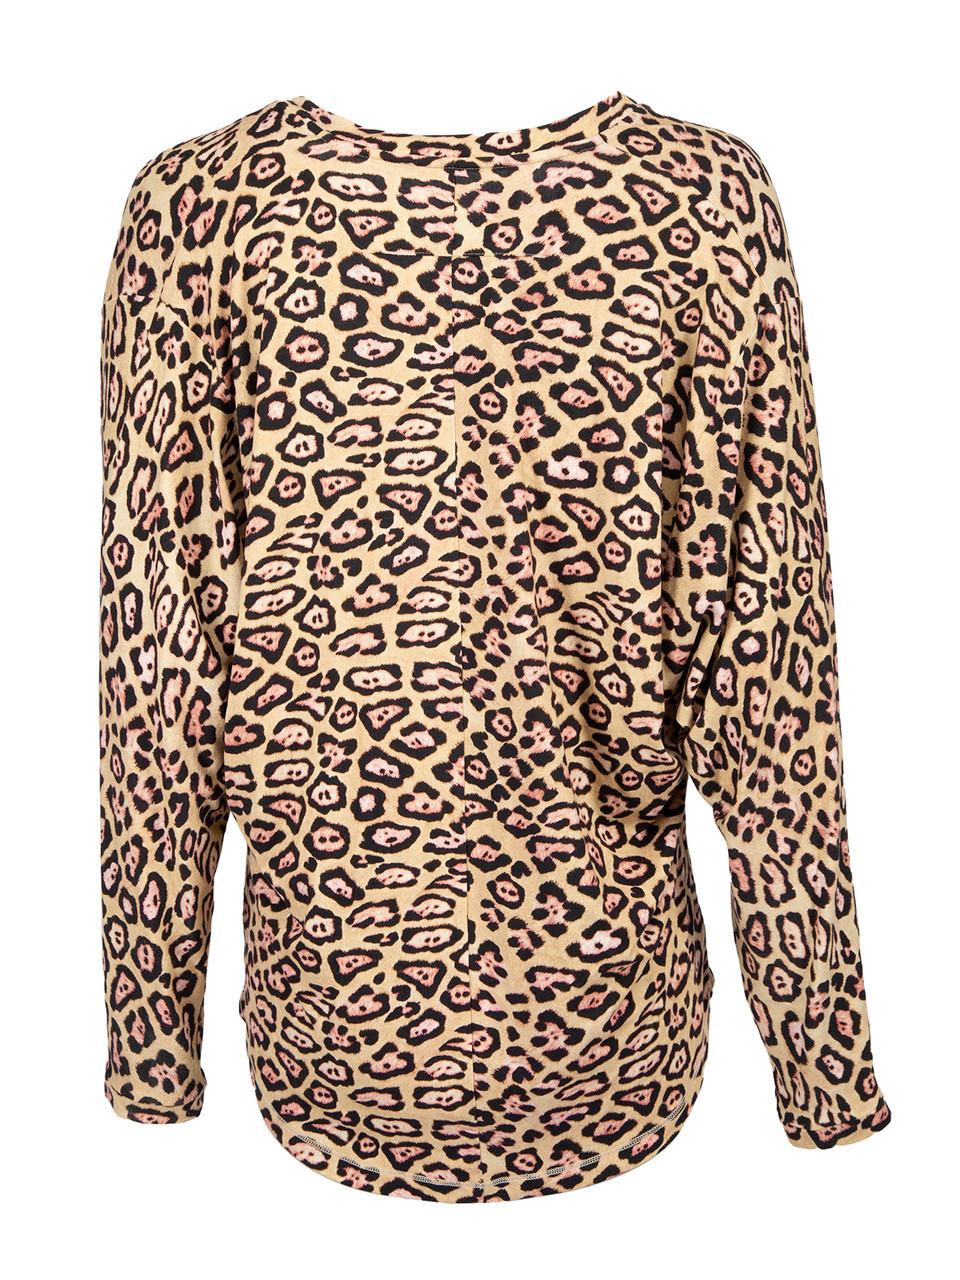 Beige Pre-Loved Givenchy Women's Leopard Print Long Sleeved Blouse For Sale